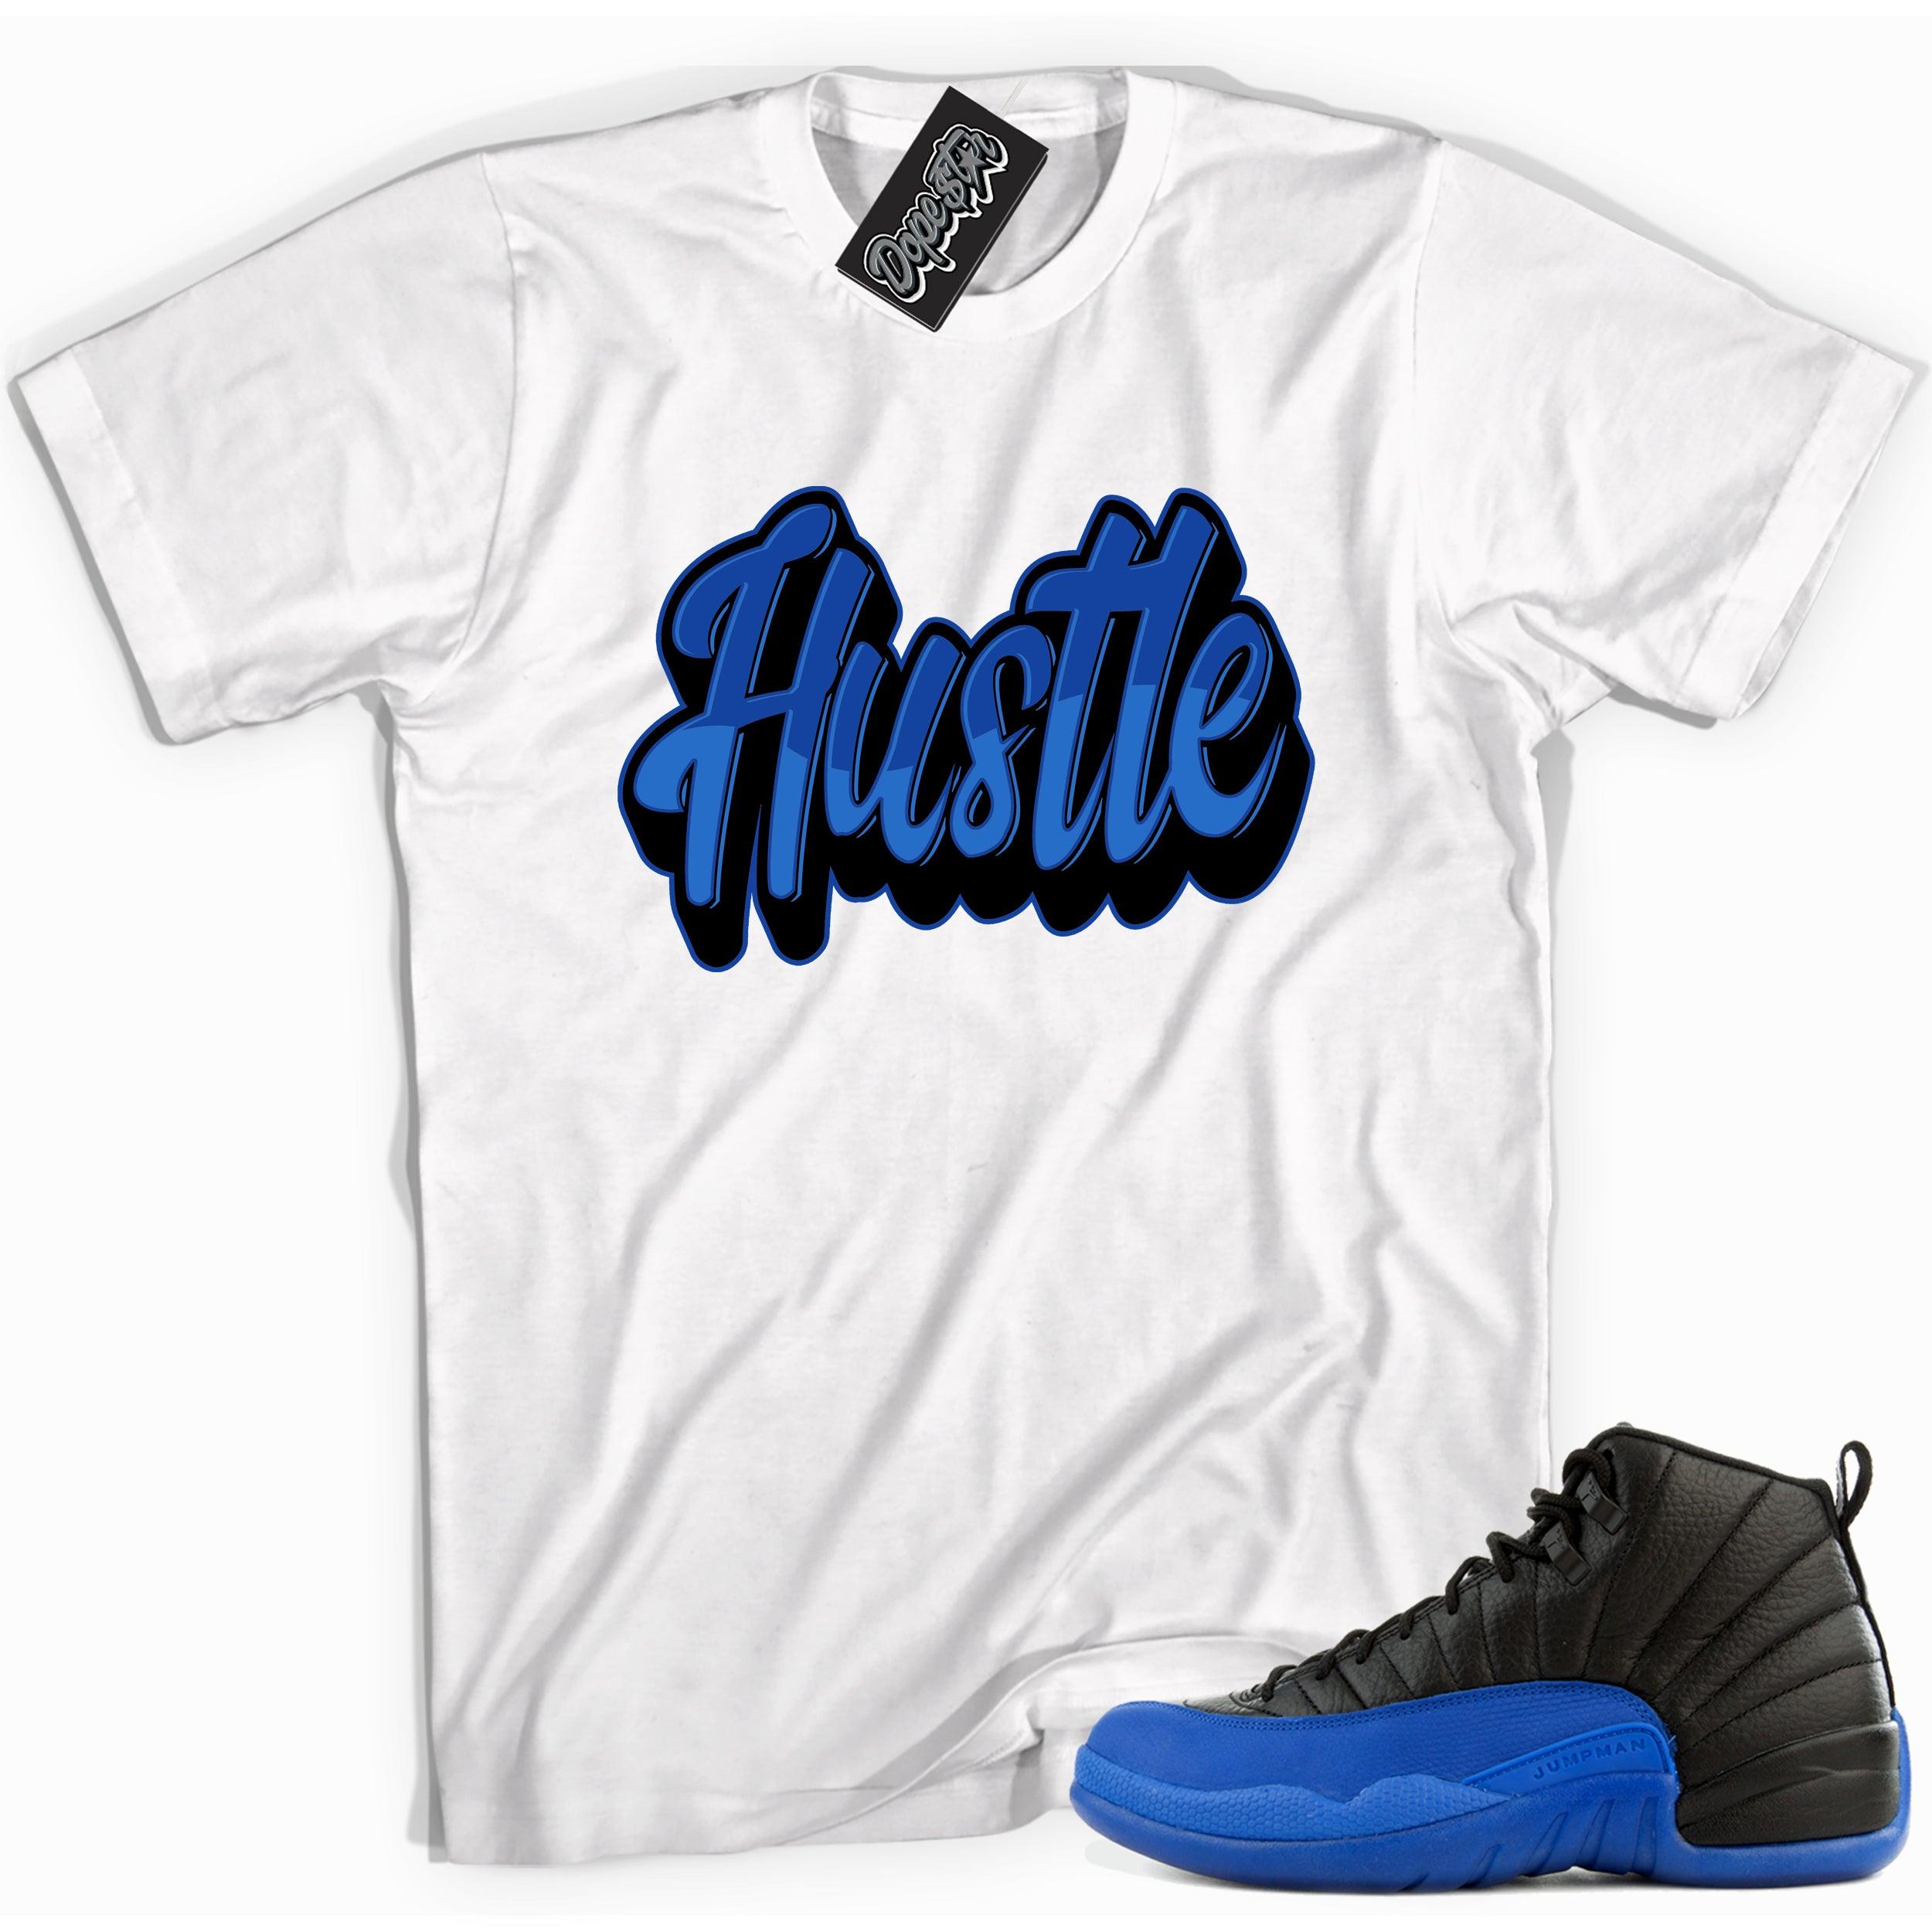 Cool white graphic tee with 'hustle' print, that perfectly matches Air Jordan 12 Retro Black Game Royal sneakers.